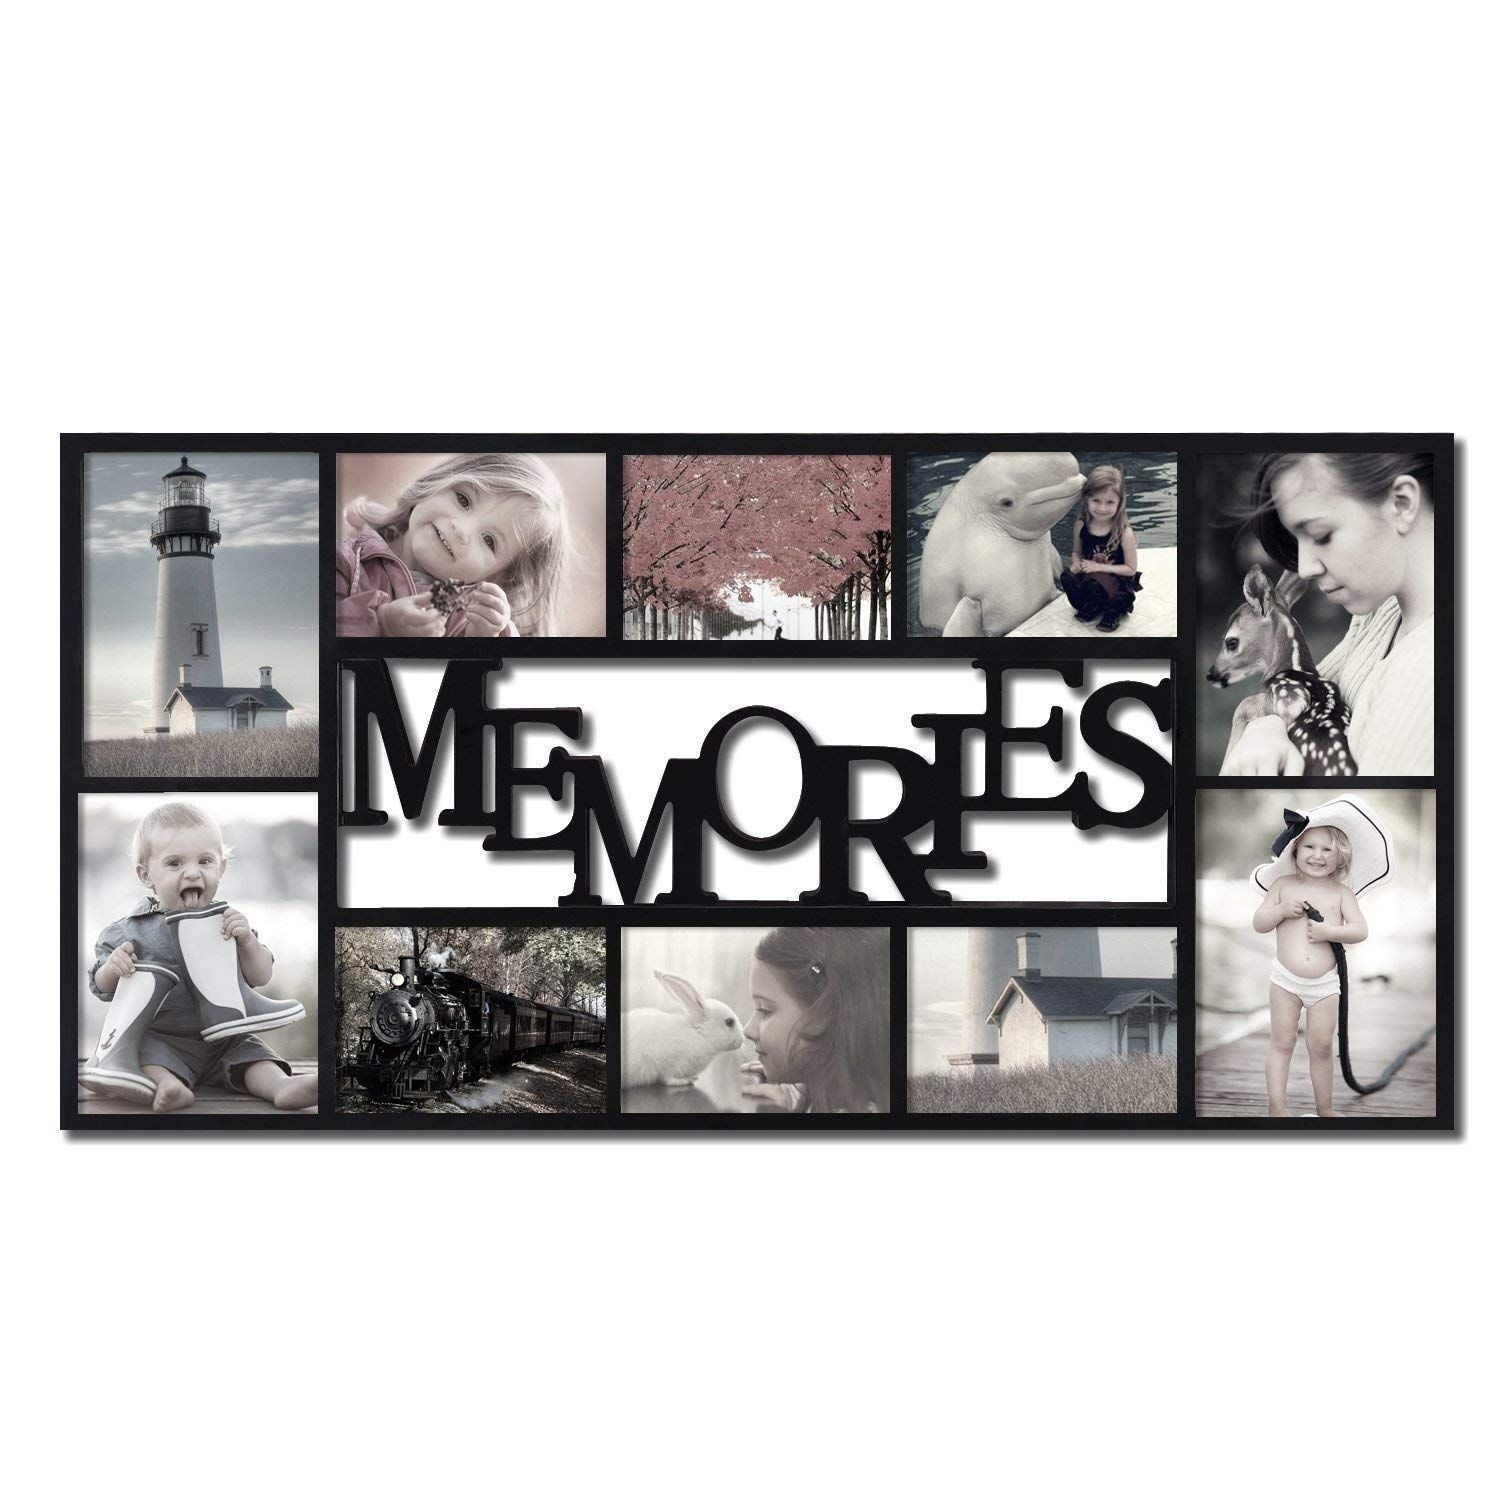 Adeco Decorative Black Plastic "Memories" Wall Hanging Collage Picture Photo Frame, 4 x 6-Inch